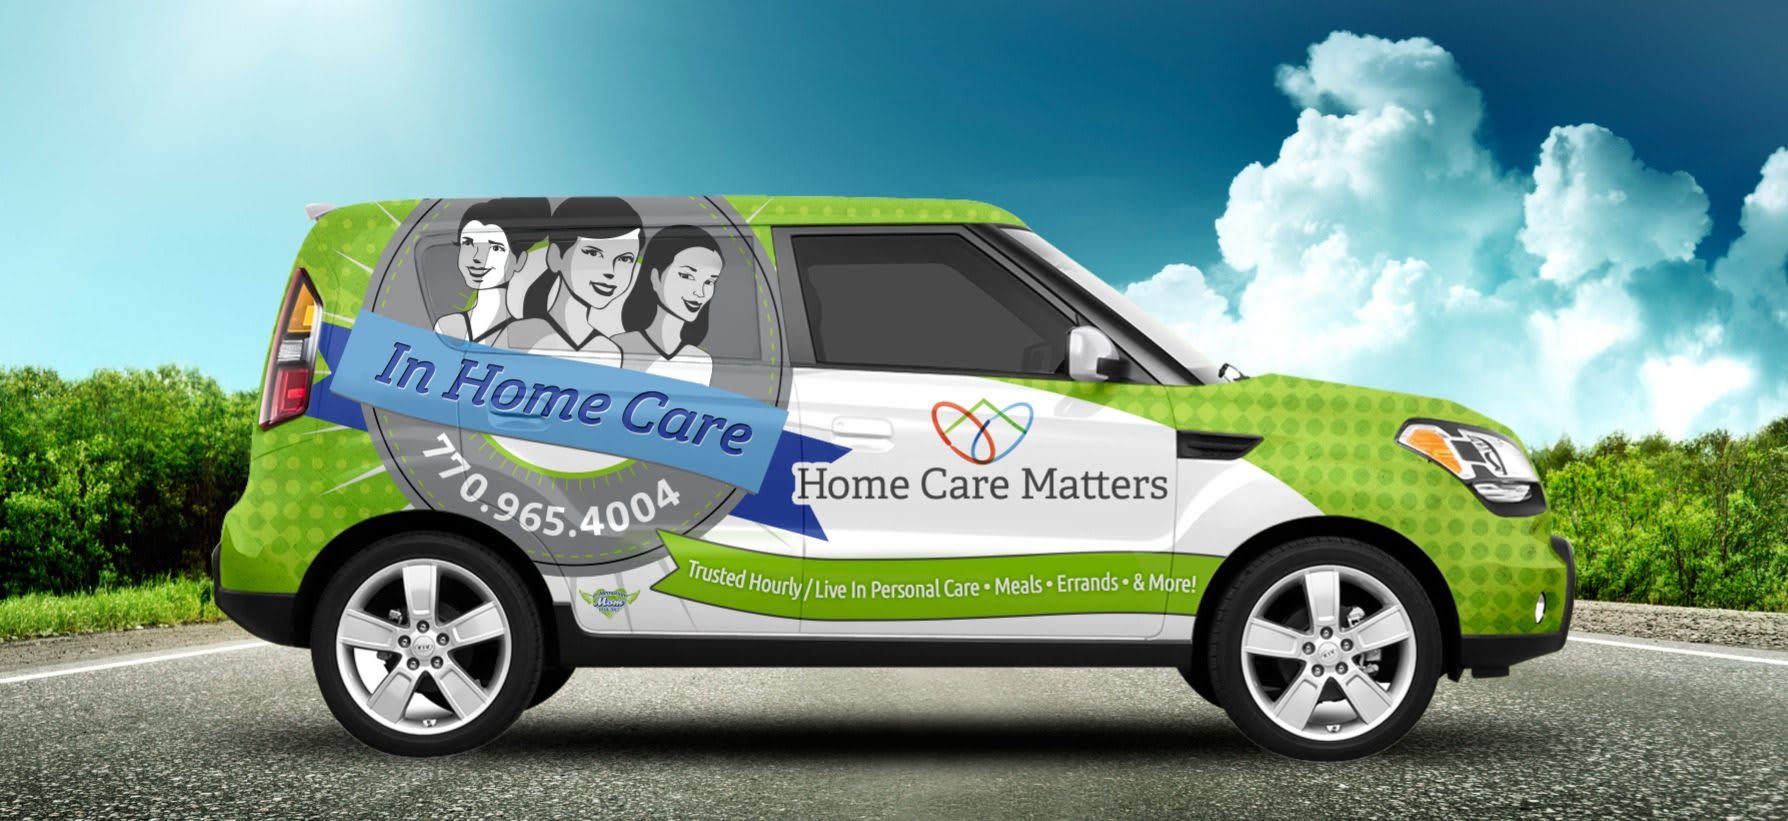 Home Care Matters - Flowery Branch, GA 